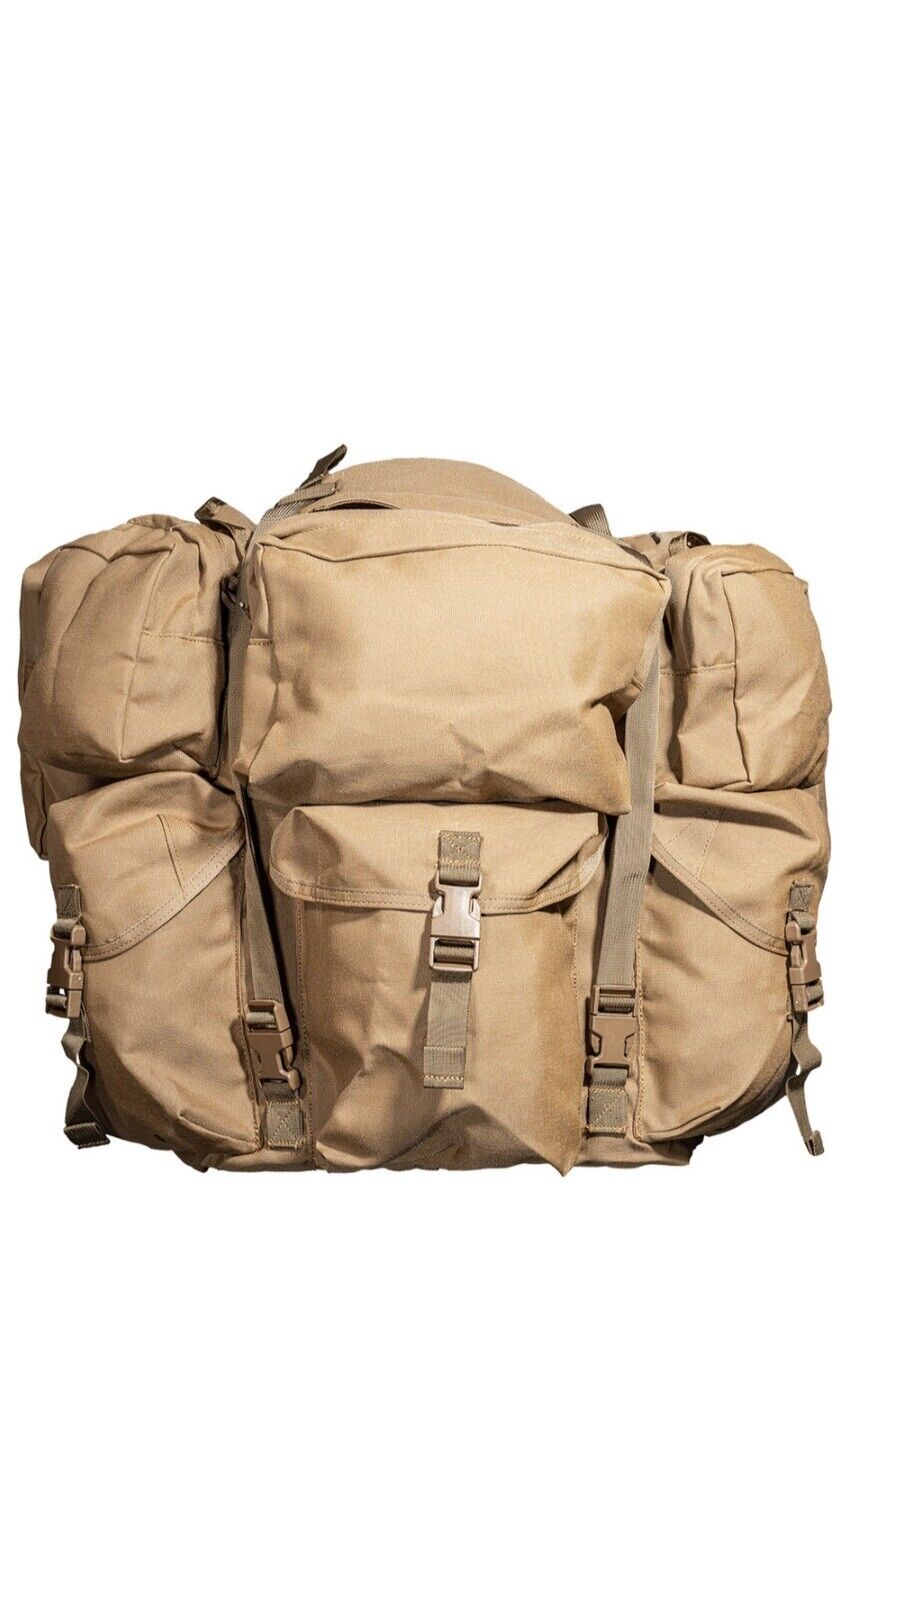 Tactical Tailor MALICE Backpack Version 2 COYOTE BROWN COMPLETE KIT